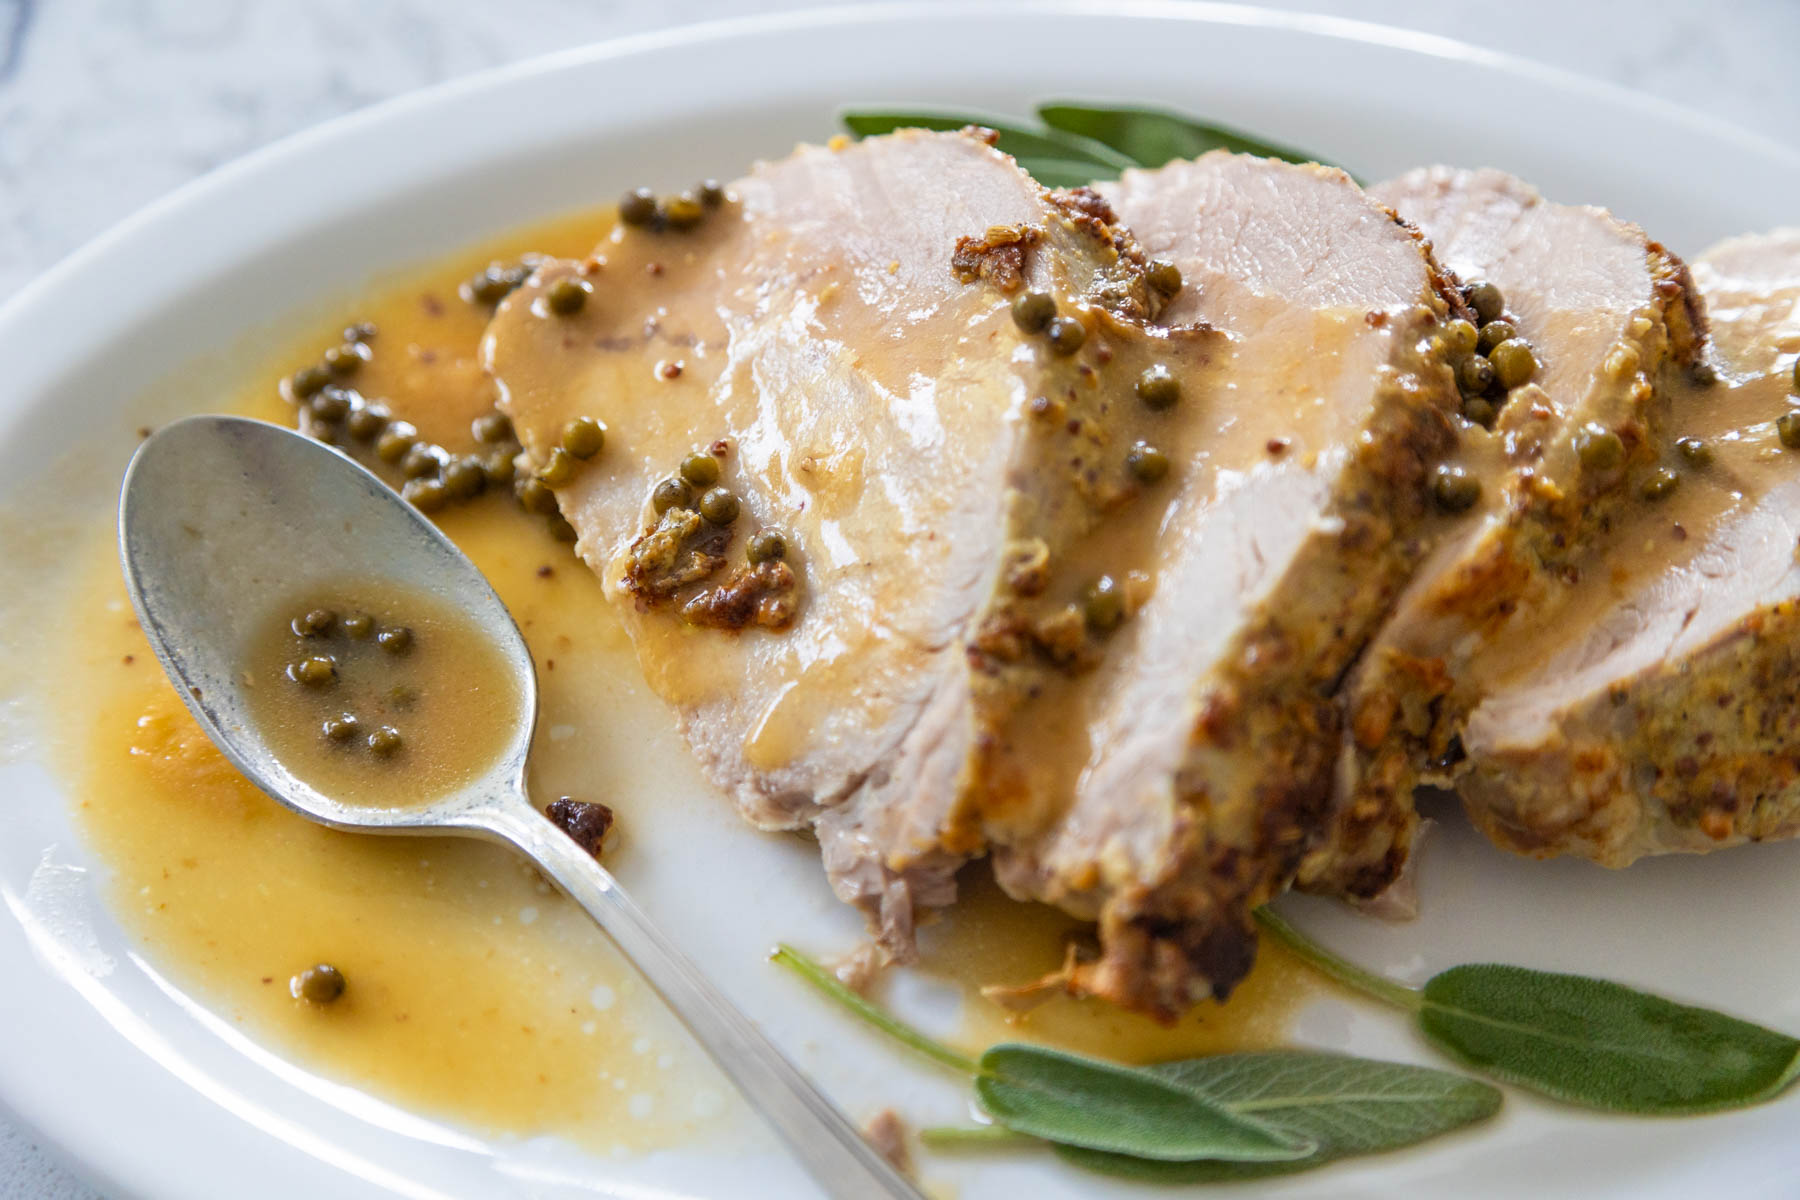 The platter has several slices of pork with a spoon filled with peppercorn sauce.